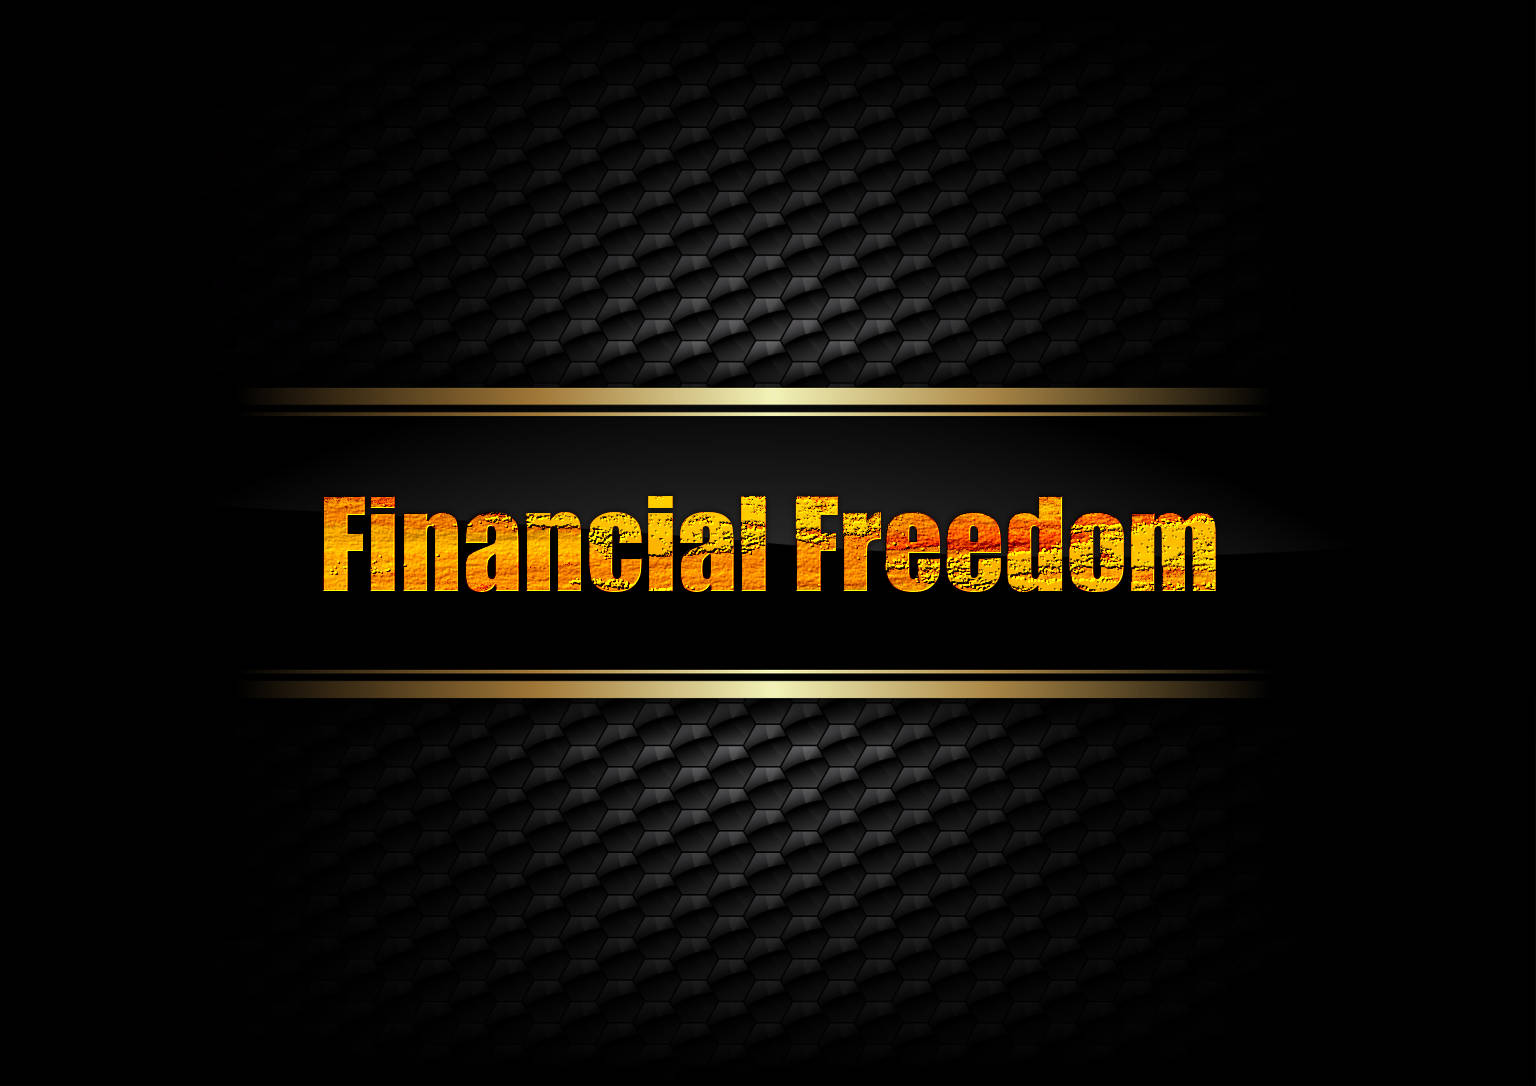 Rules, Protection, Wealth - the formula for Financial Freedom